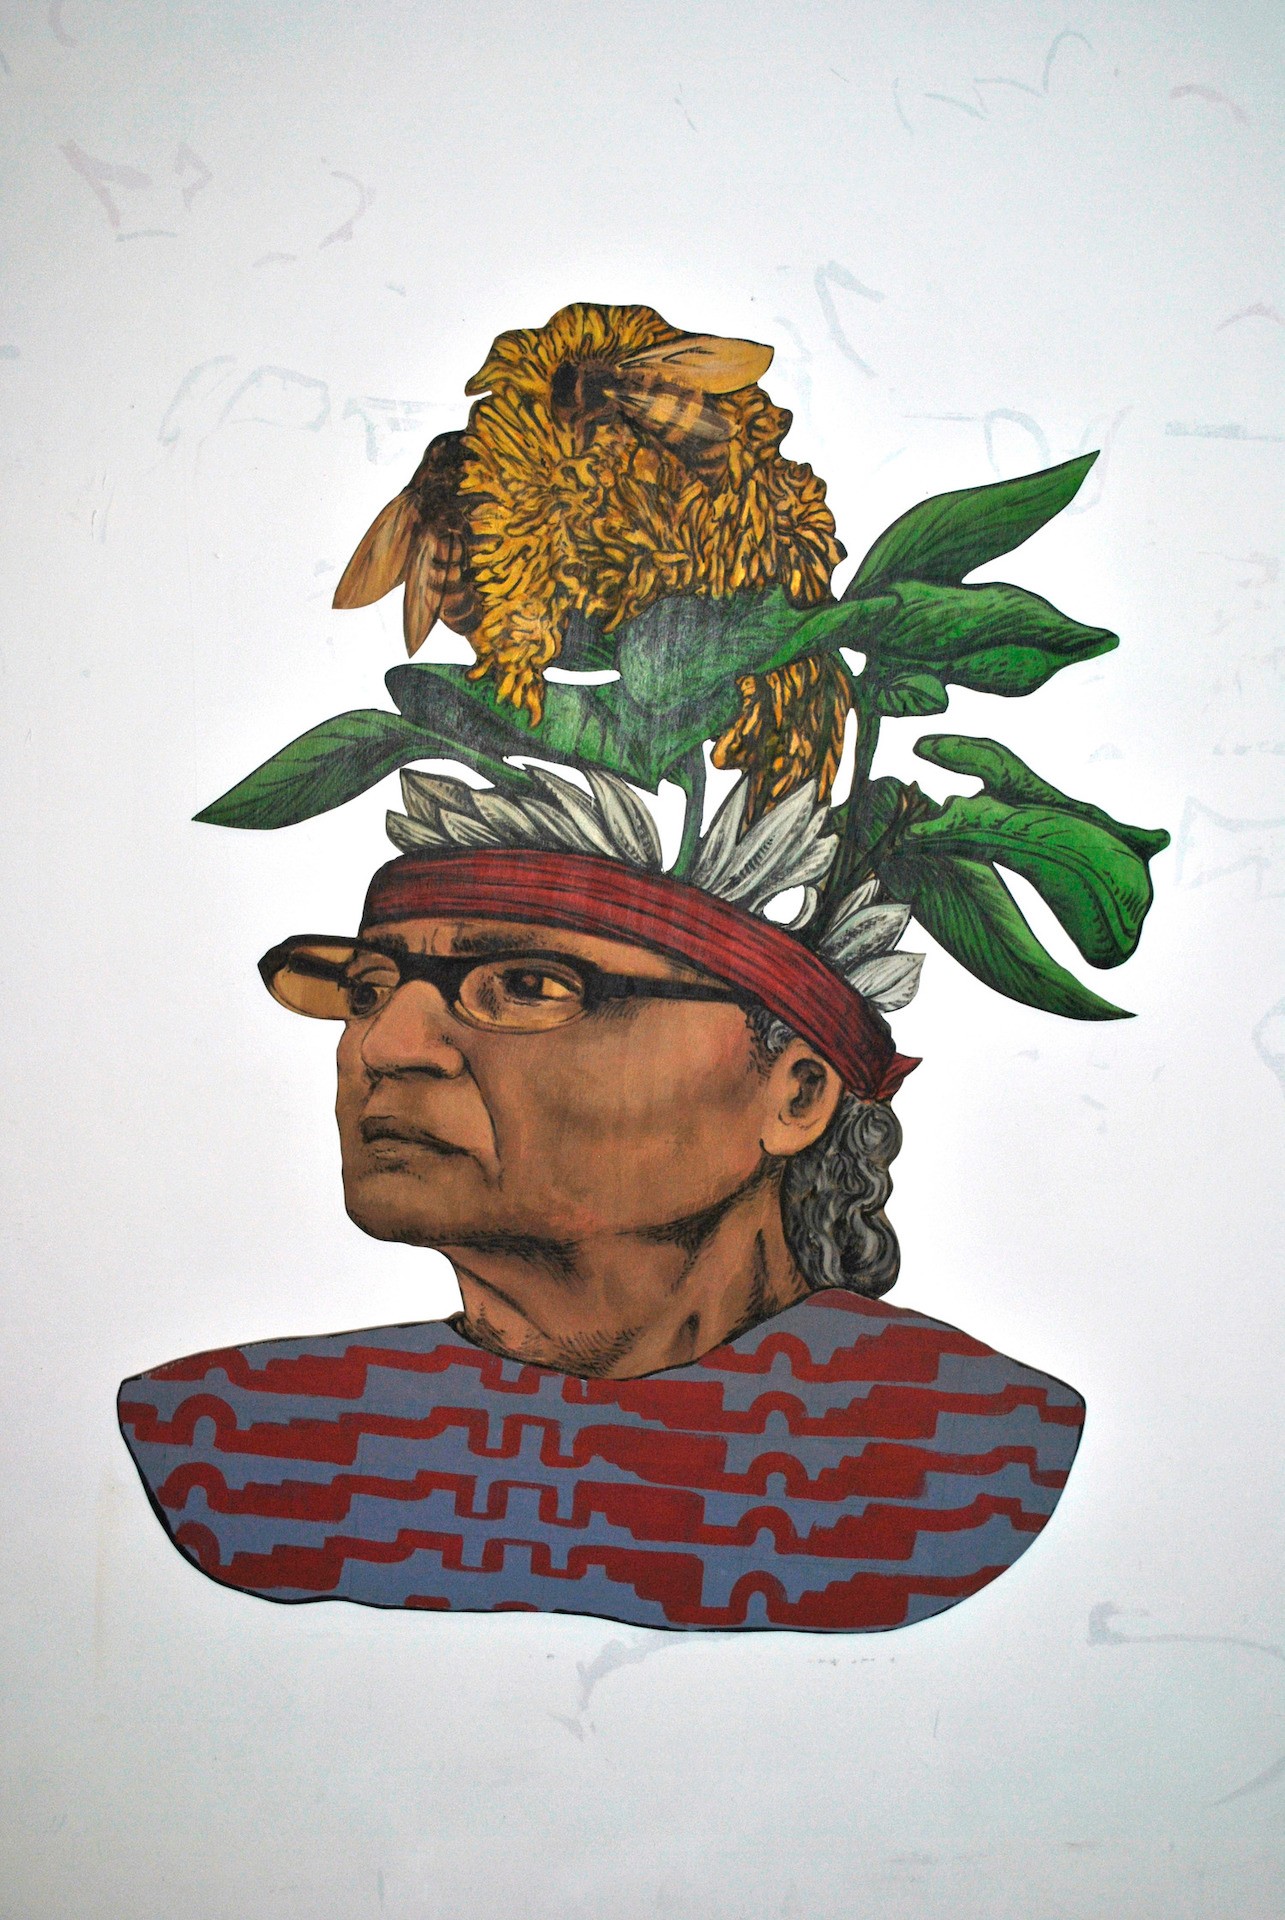 A painting of an indigenous man wearing glasses with feathers and a marigold flower growing out of his head. Two bees pollinate the flowers on top.  